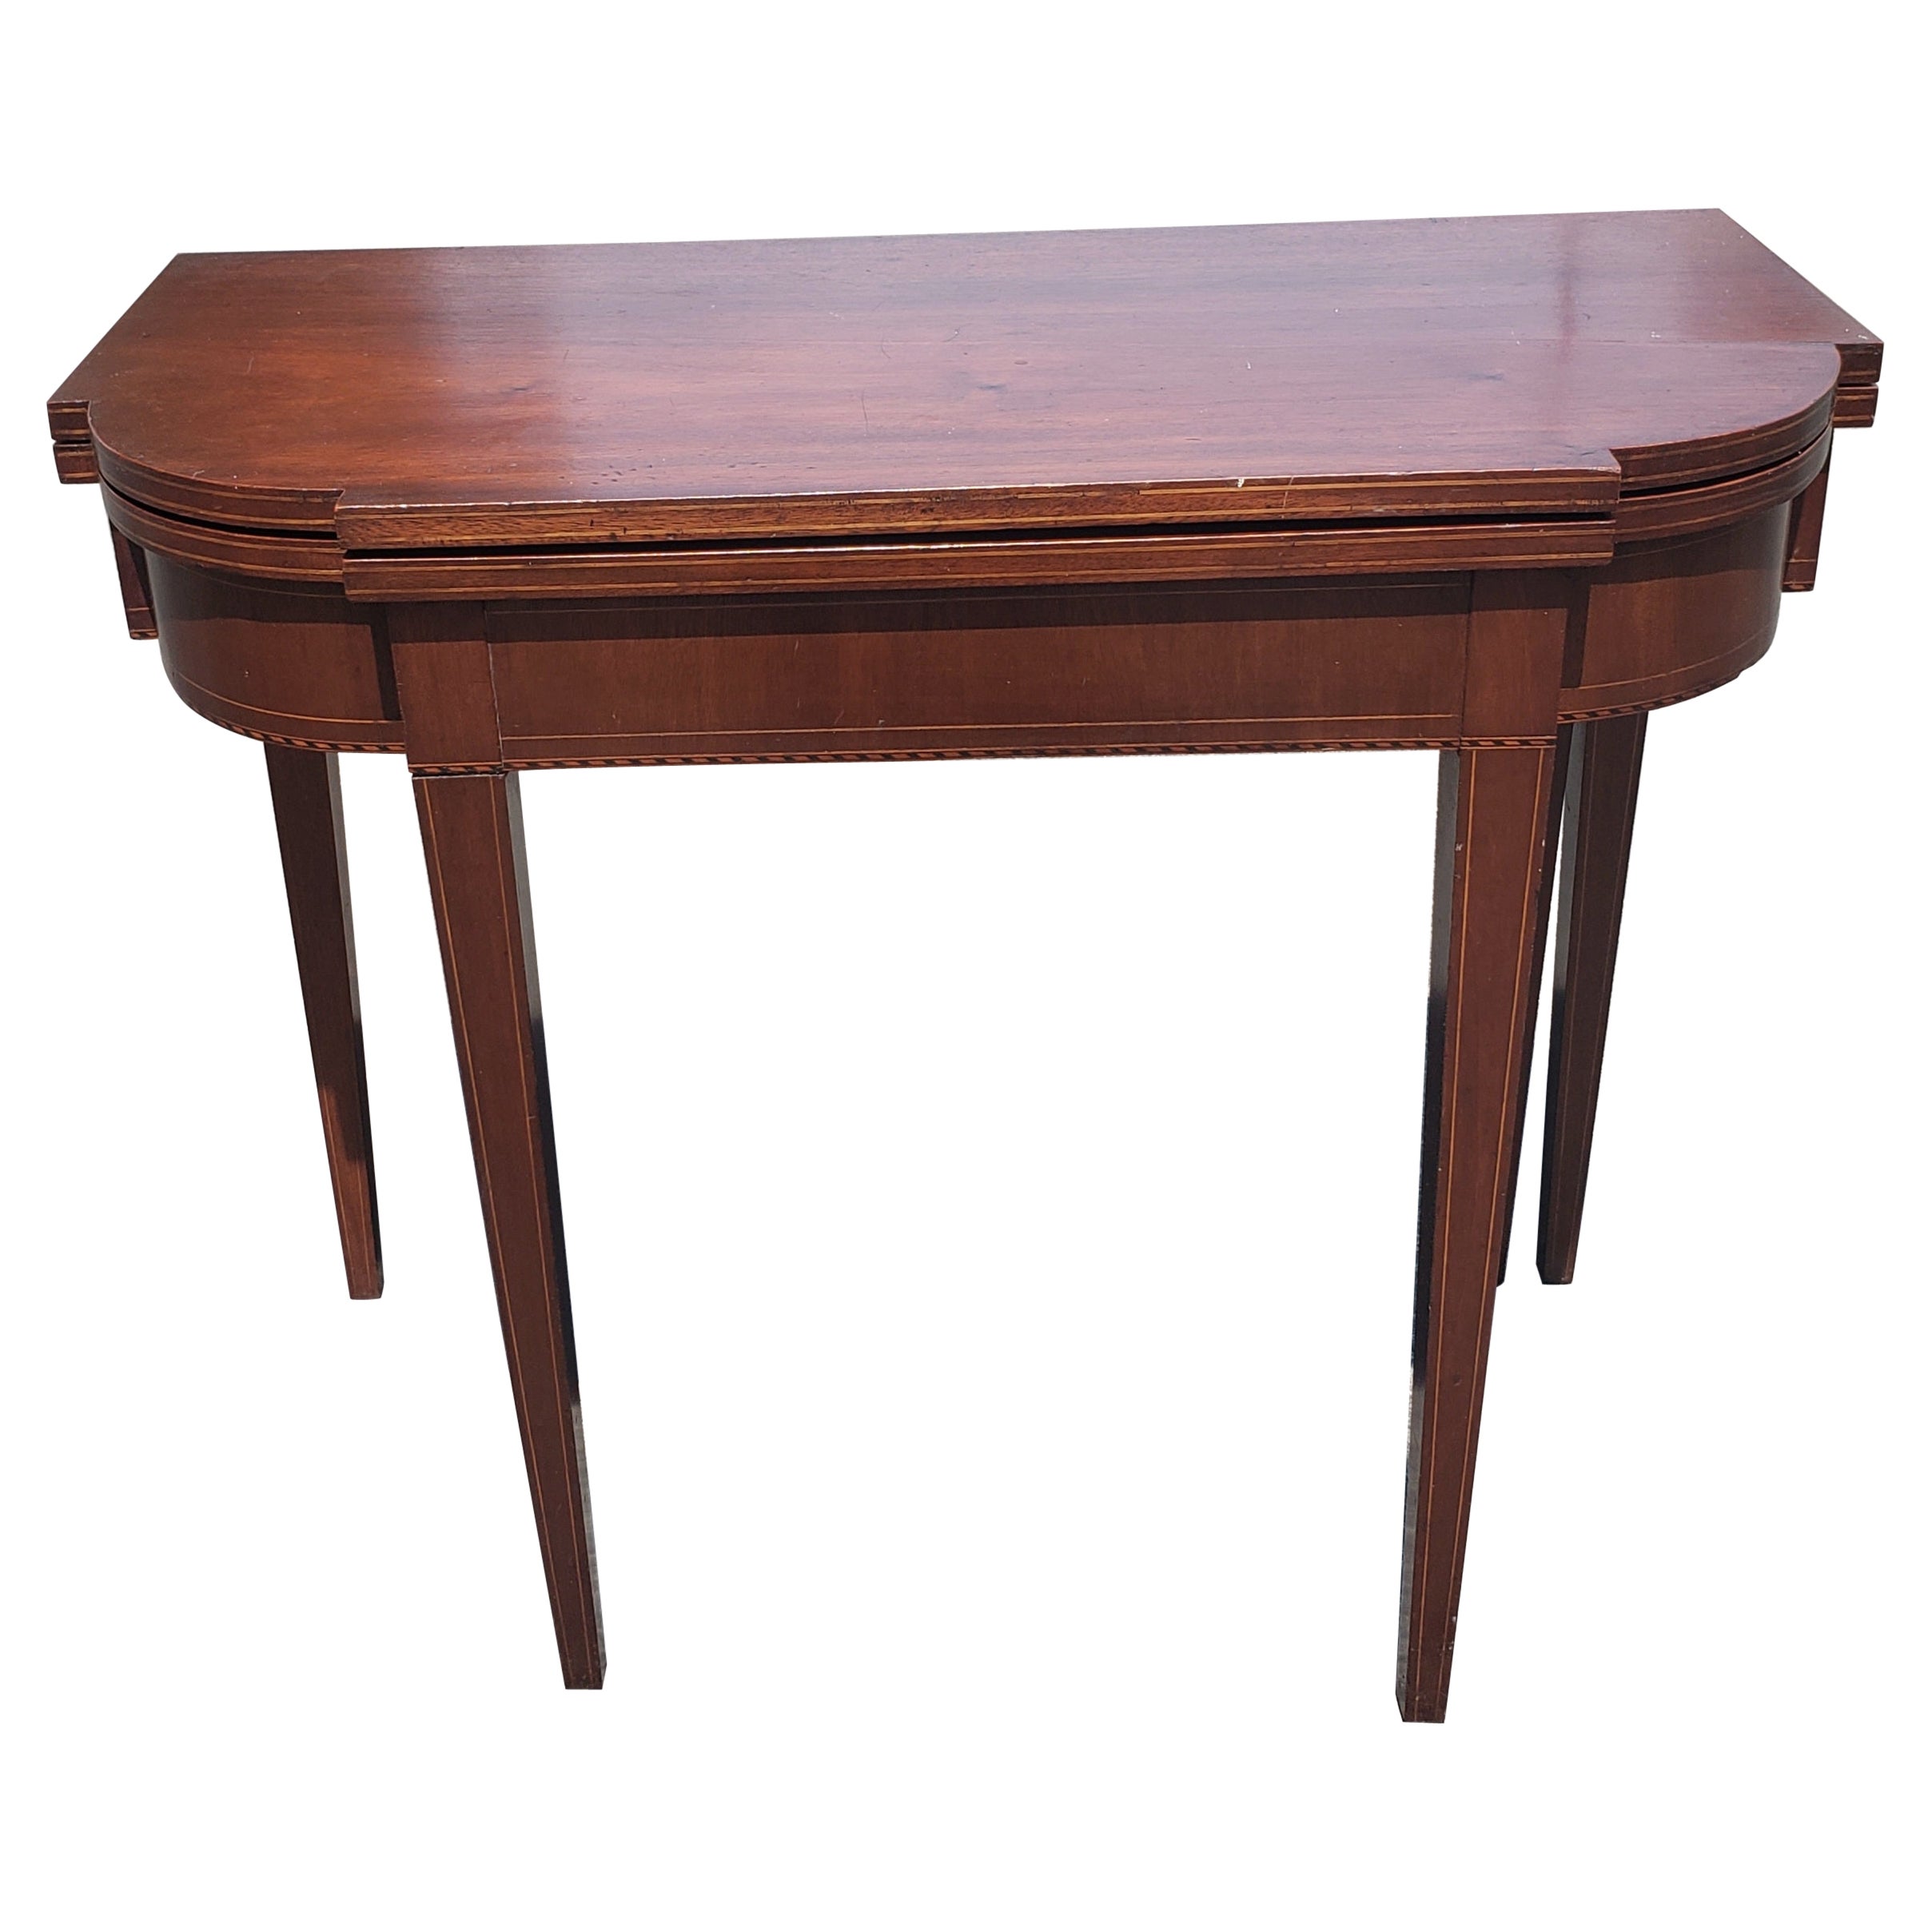 1920s Mahogany and Satinwood Inlaid Federal Style Fold-Top Console or Card Table For Sale